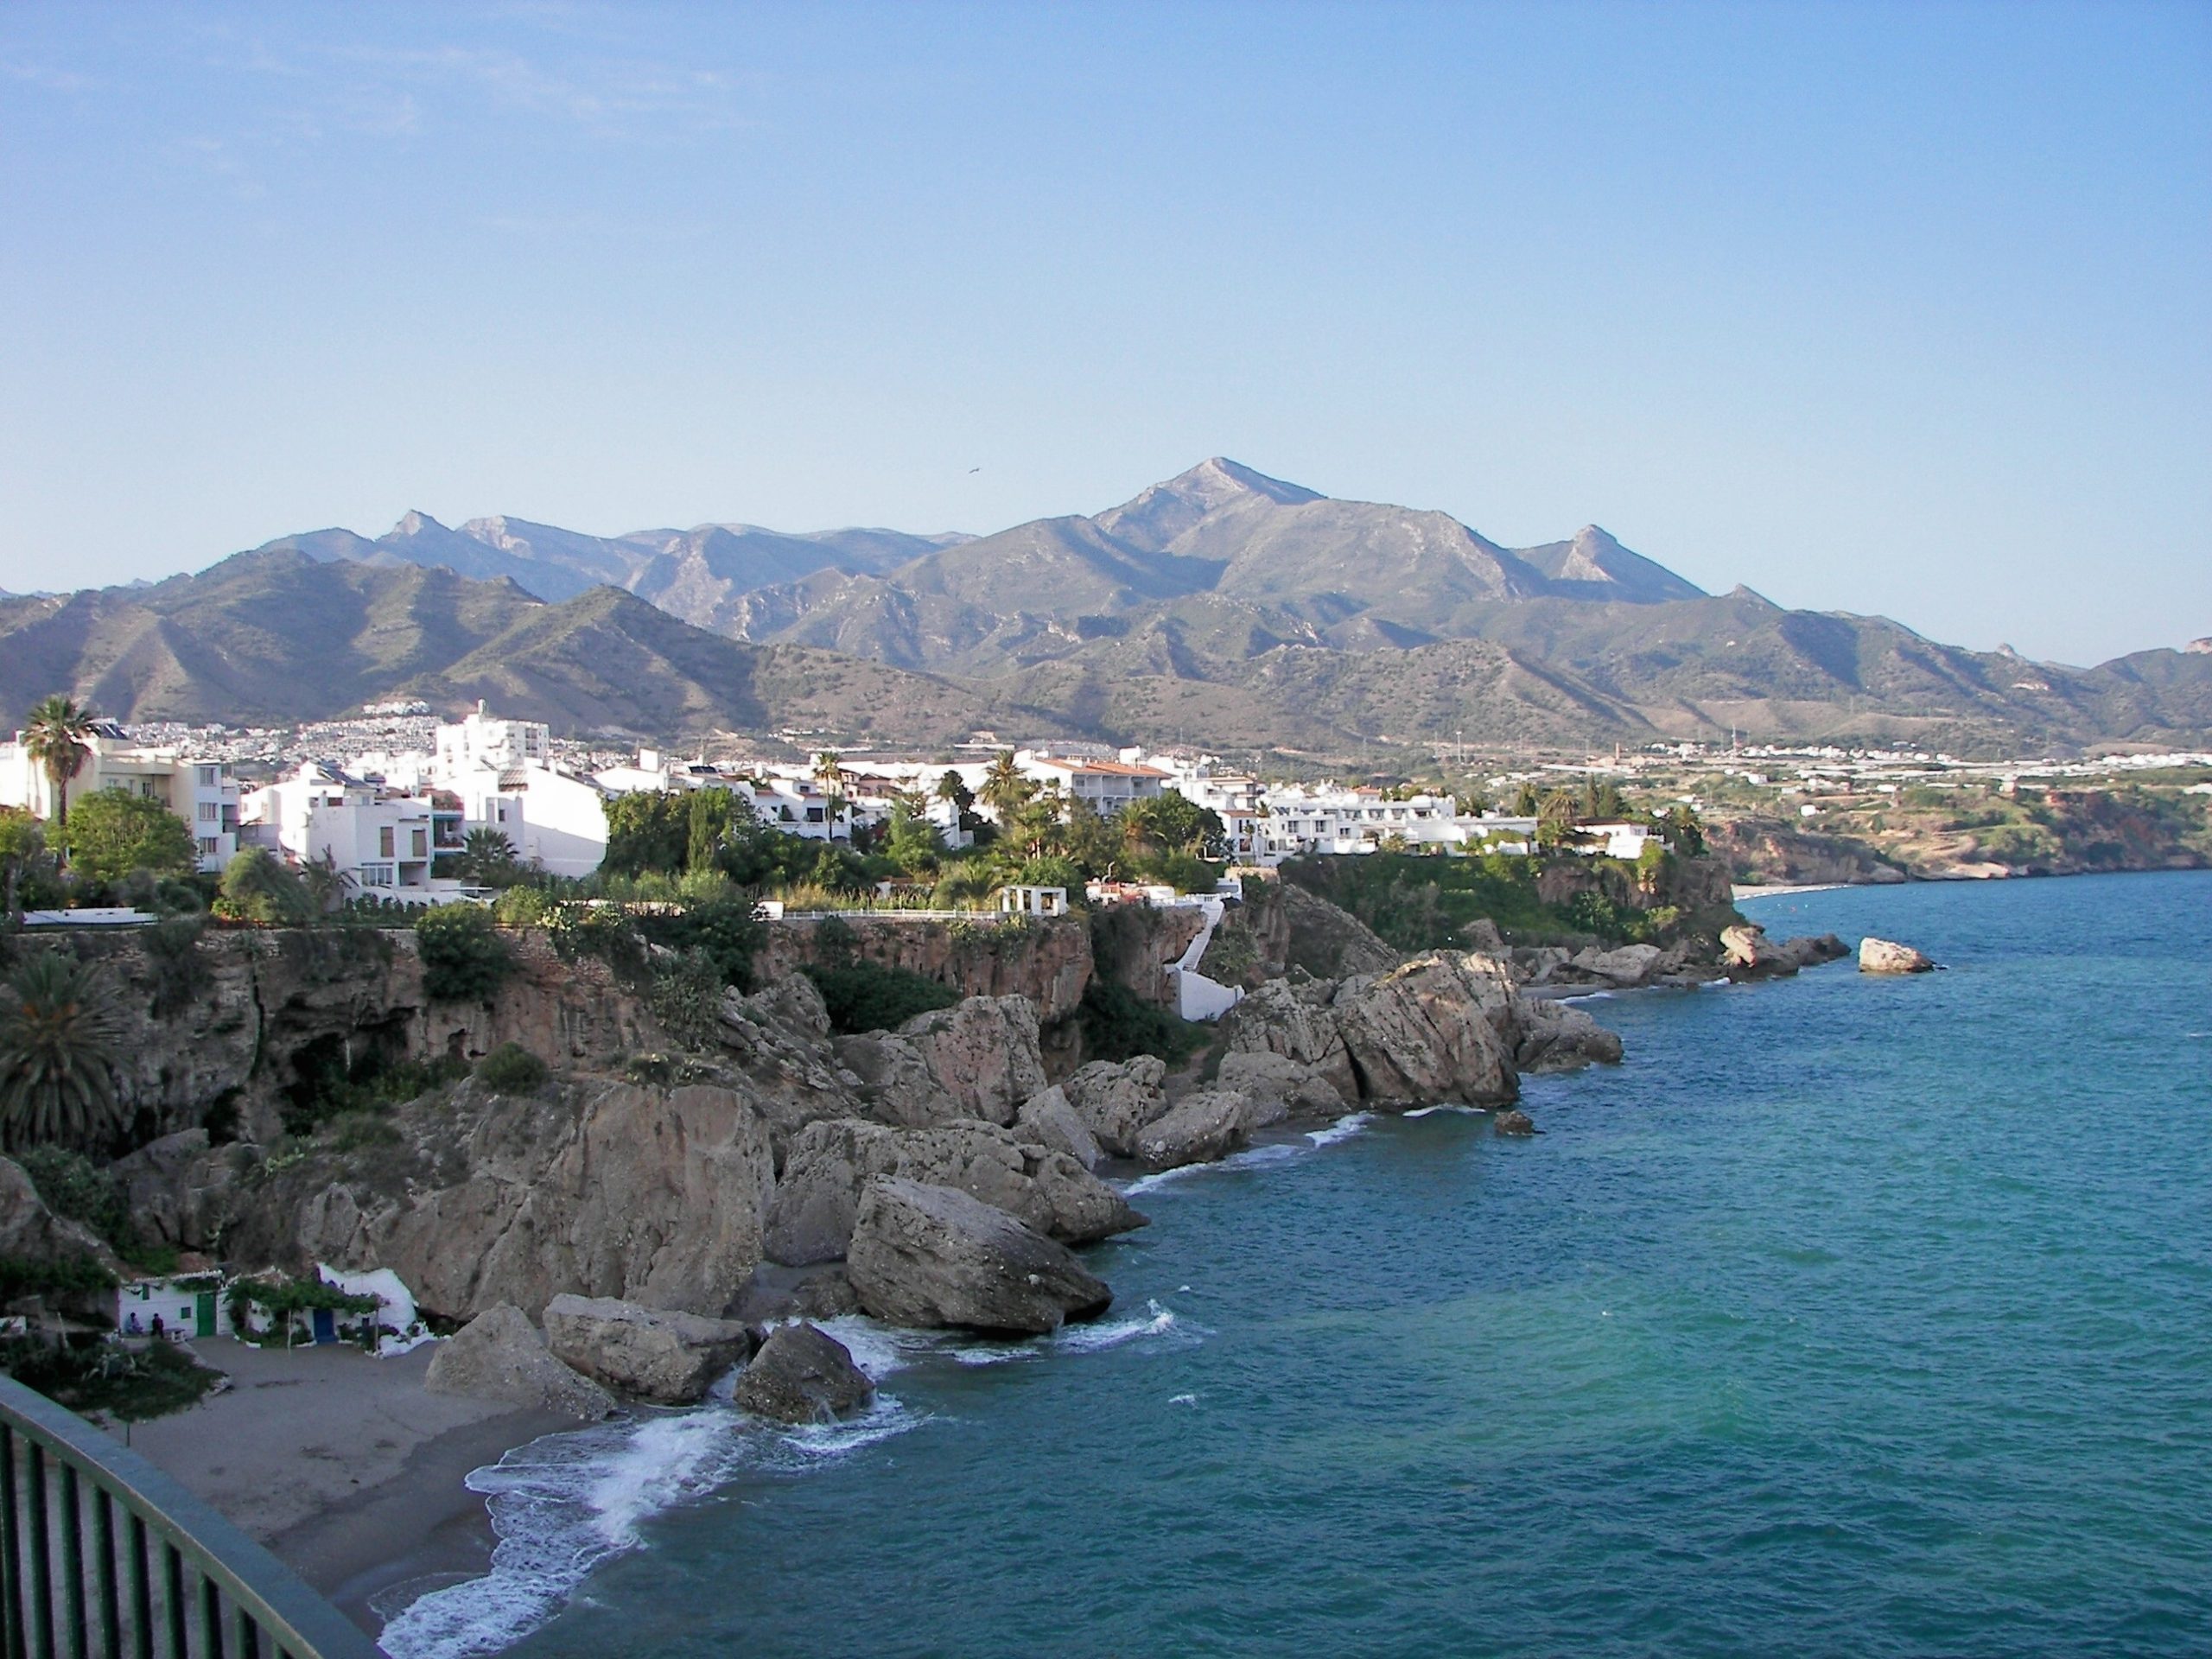 It's a family affair as Oasis Properties has grown from managing just a couple of homes to meeting 'all your property needs' in Spain's Nerja area